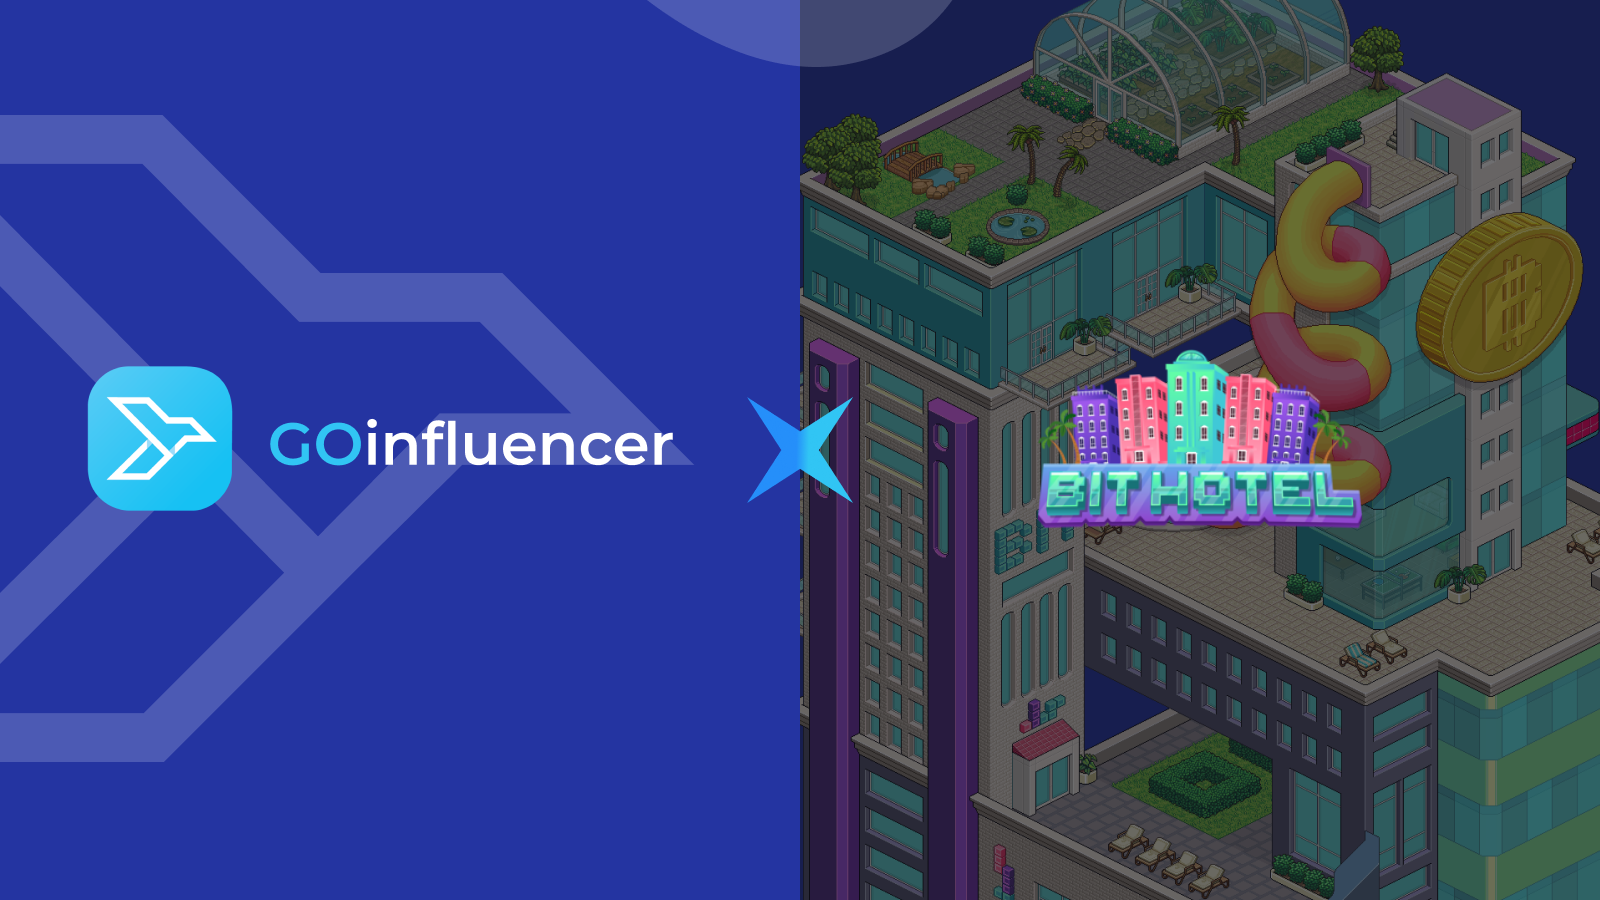 GOinfluencer partnership announcement with Bit Hotel